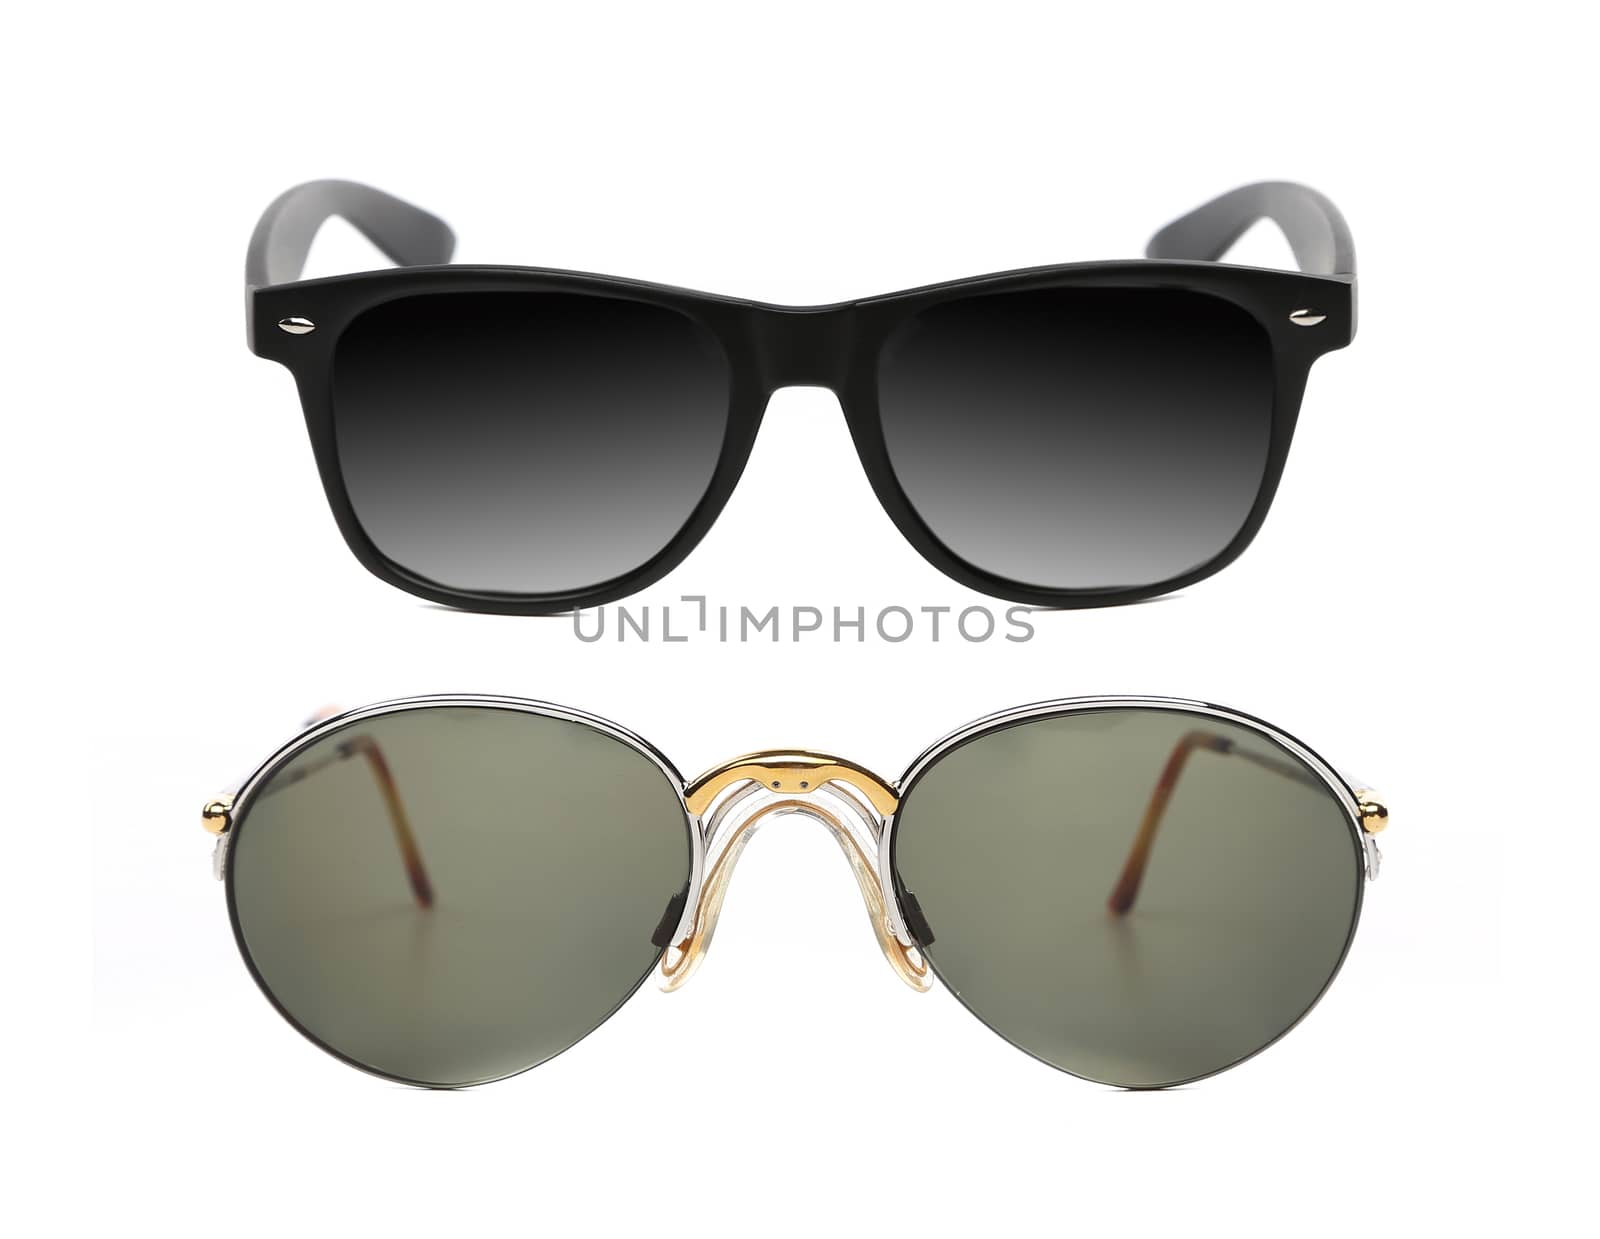 Two pair of fashionable sunglasses. Isolated on a white background.